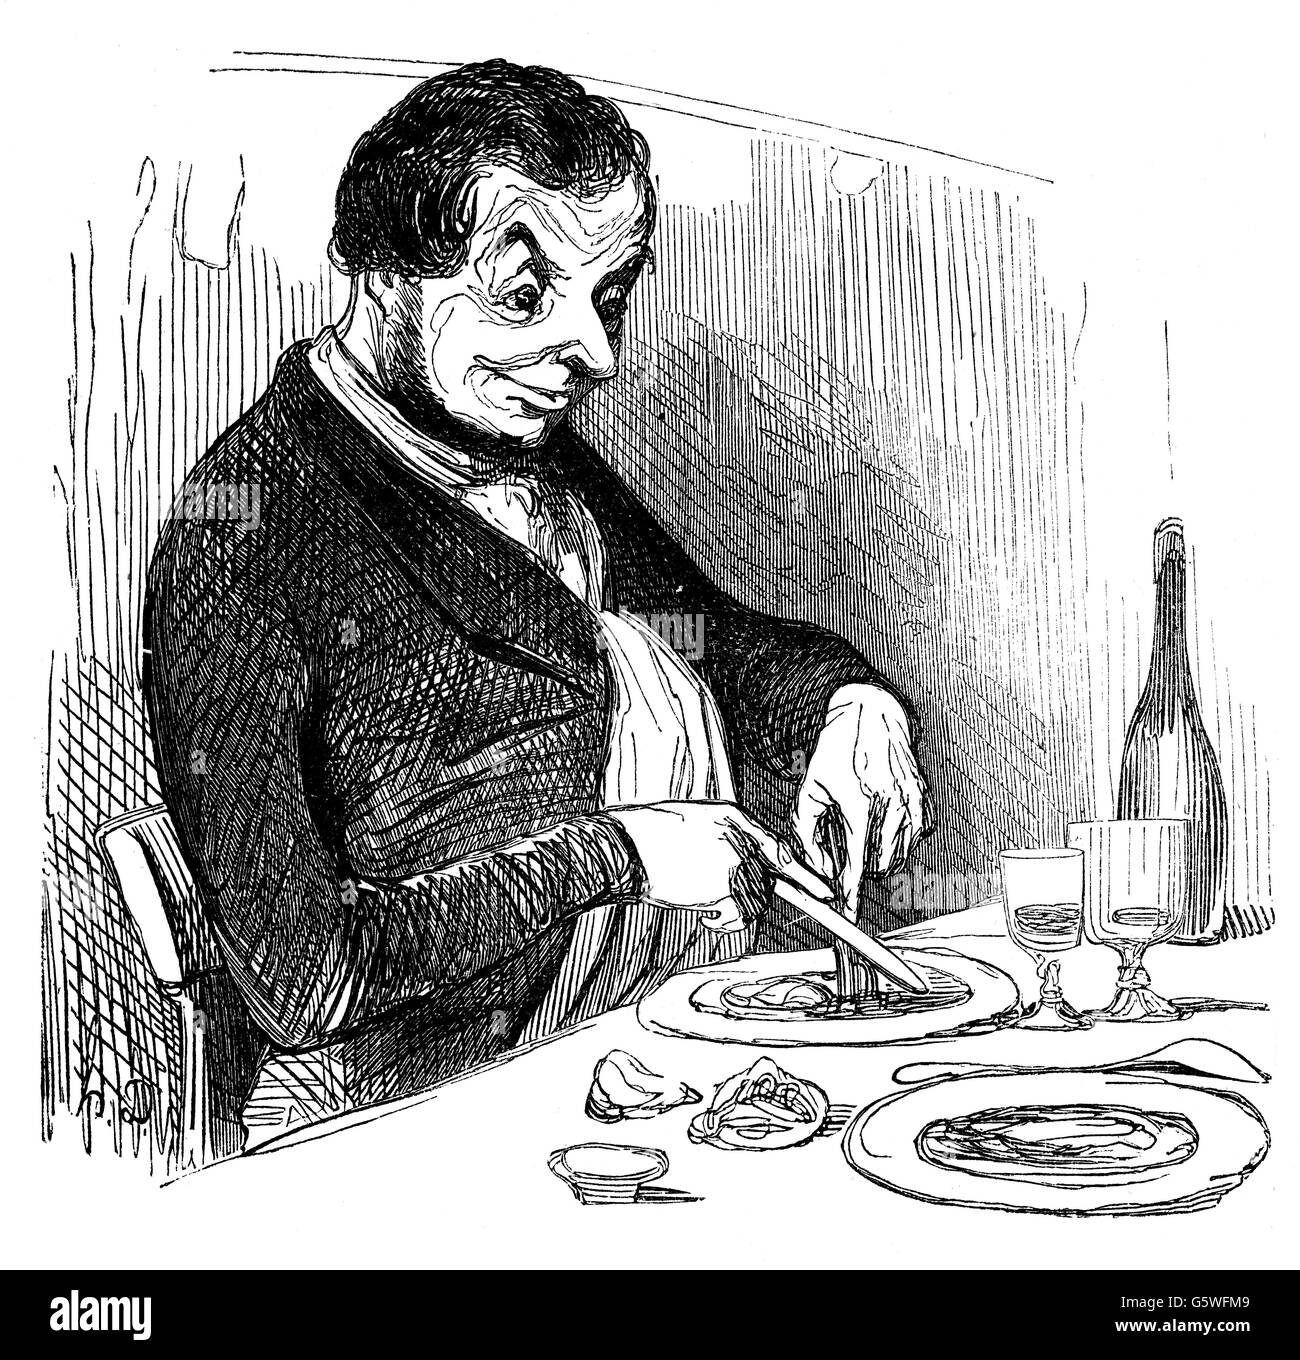 gastronomy, meals, 'Quarante sous' (Forty sous), man eating, lithograph, by Honore Daumier (1809 - 1879), from: 'La Caricature', Paris, 7.2.1843,19th century, graphic, graphics, France, food, meal, meals, half length, sitting, sit, sitting, sit, table, tables, plate, plates, knife, knives, fork, forks, food, eating, eat, glasses, bottle, bottles, pleasure, caricature, caricatures, satire, press, presses, magazines, , Additional-Rights-Clearences-Not Available Stock Photo